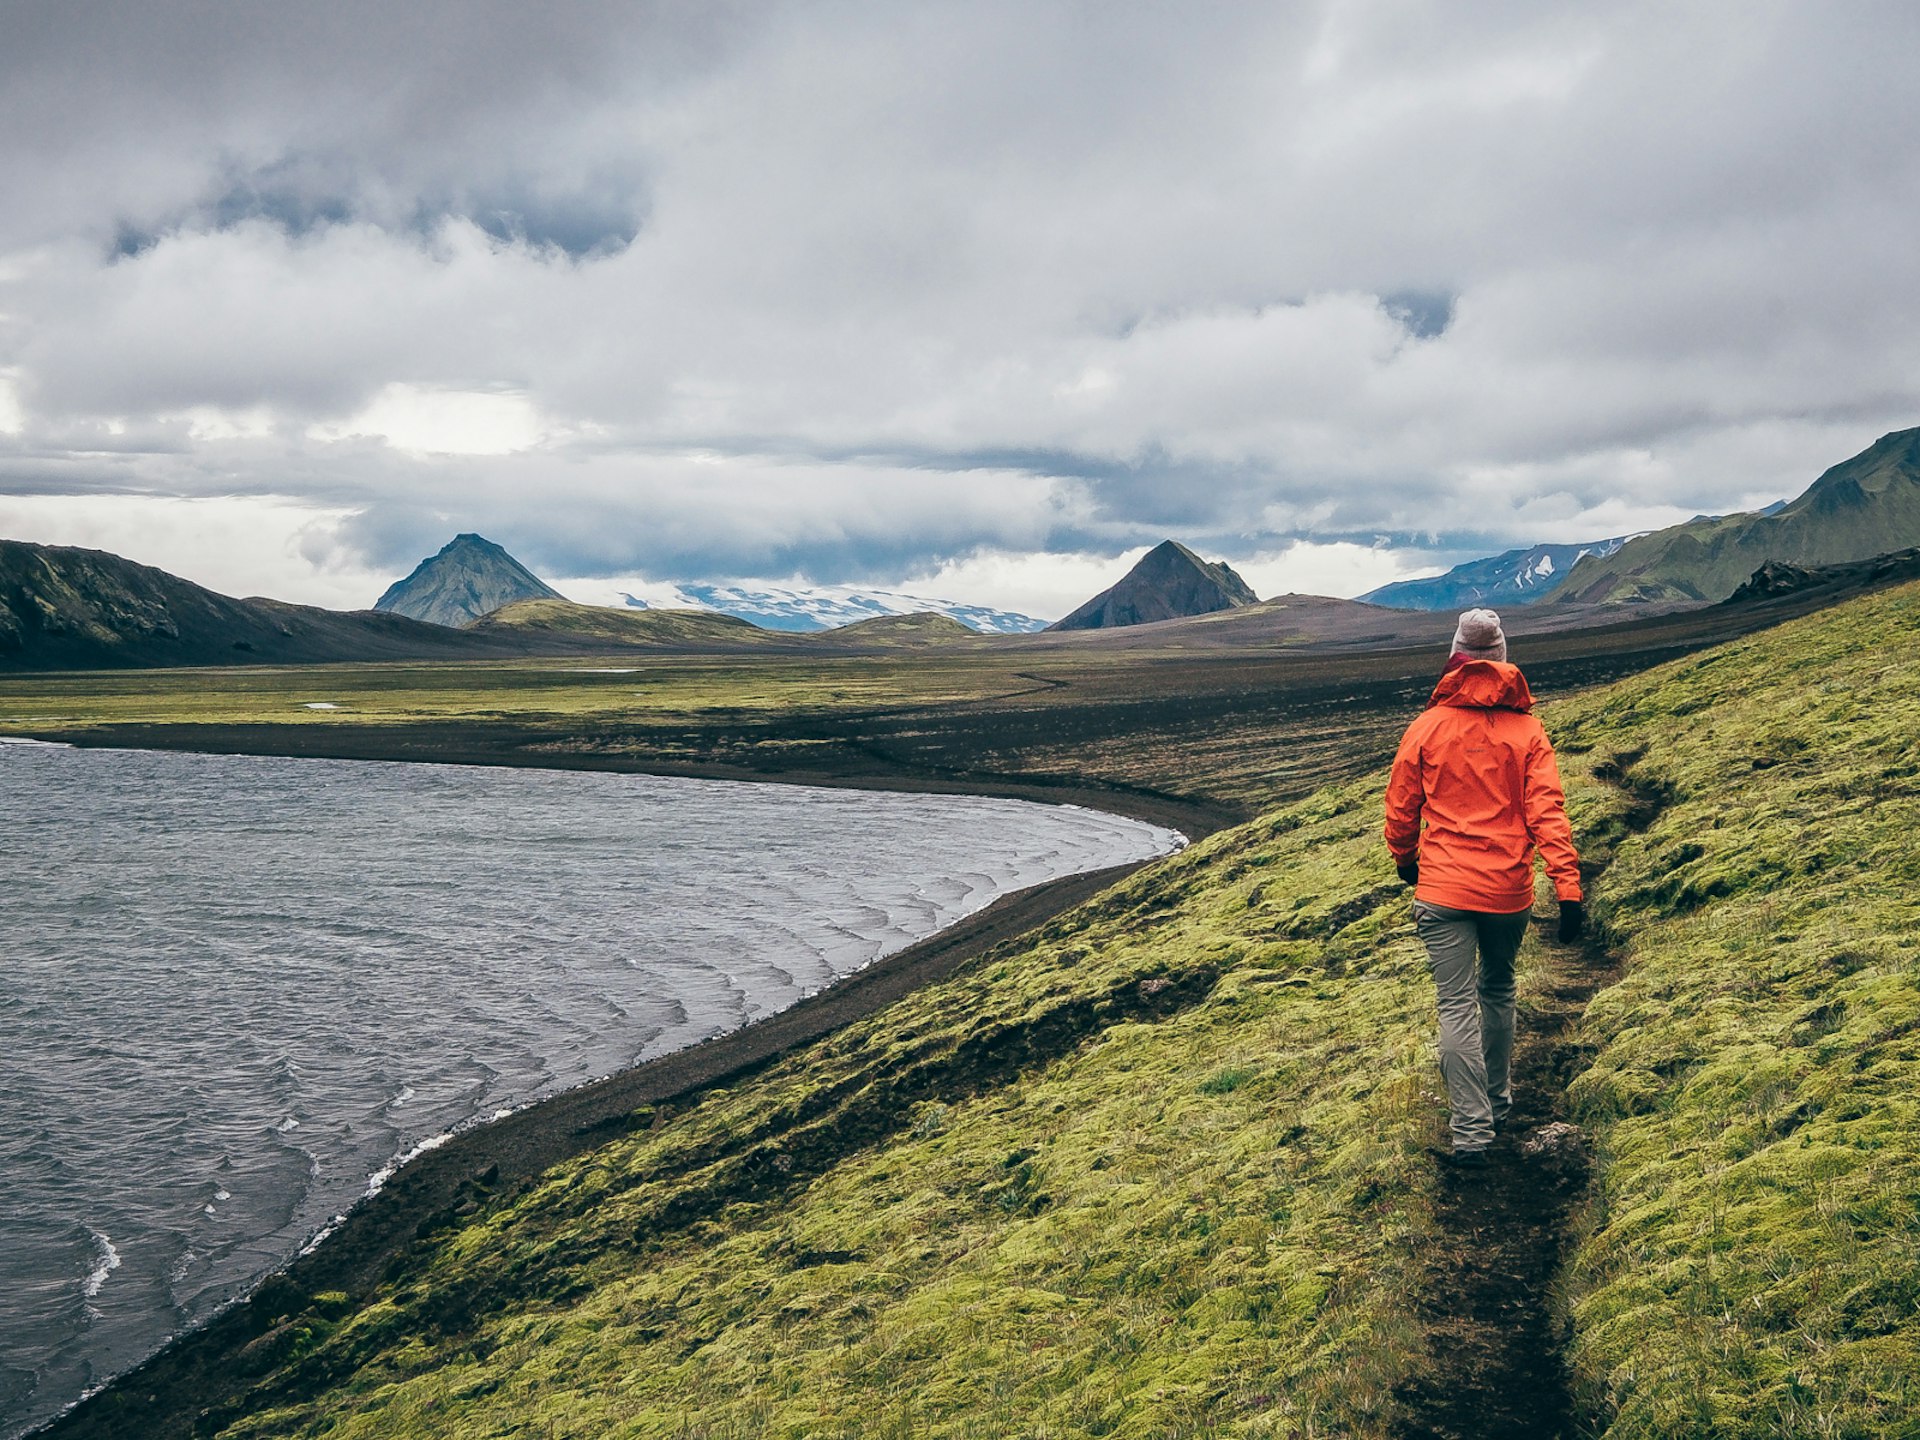 Hiking along the shore of the Alftavatn Lake, along the Laugavegurin hiking trail in Iceland